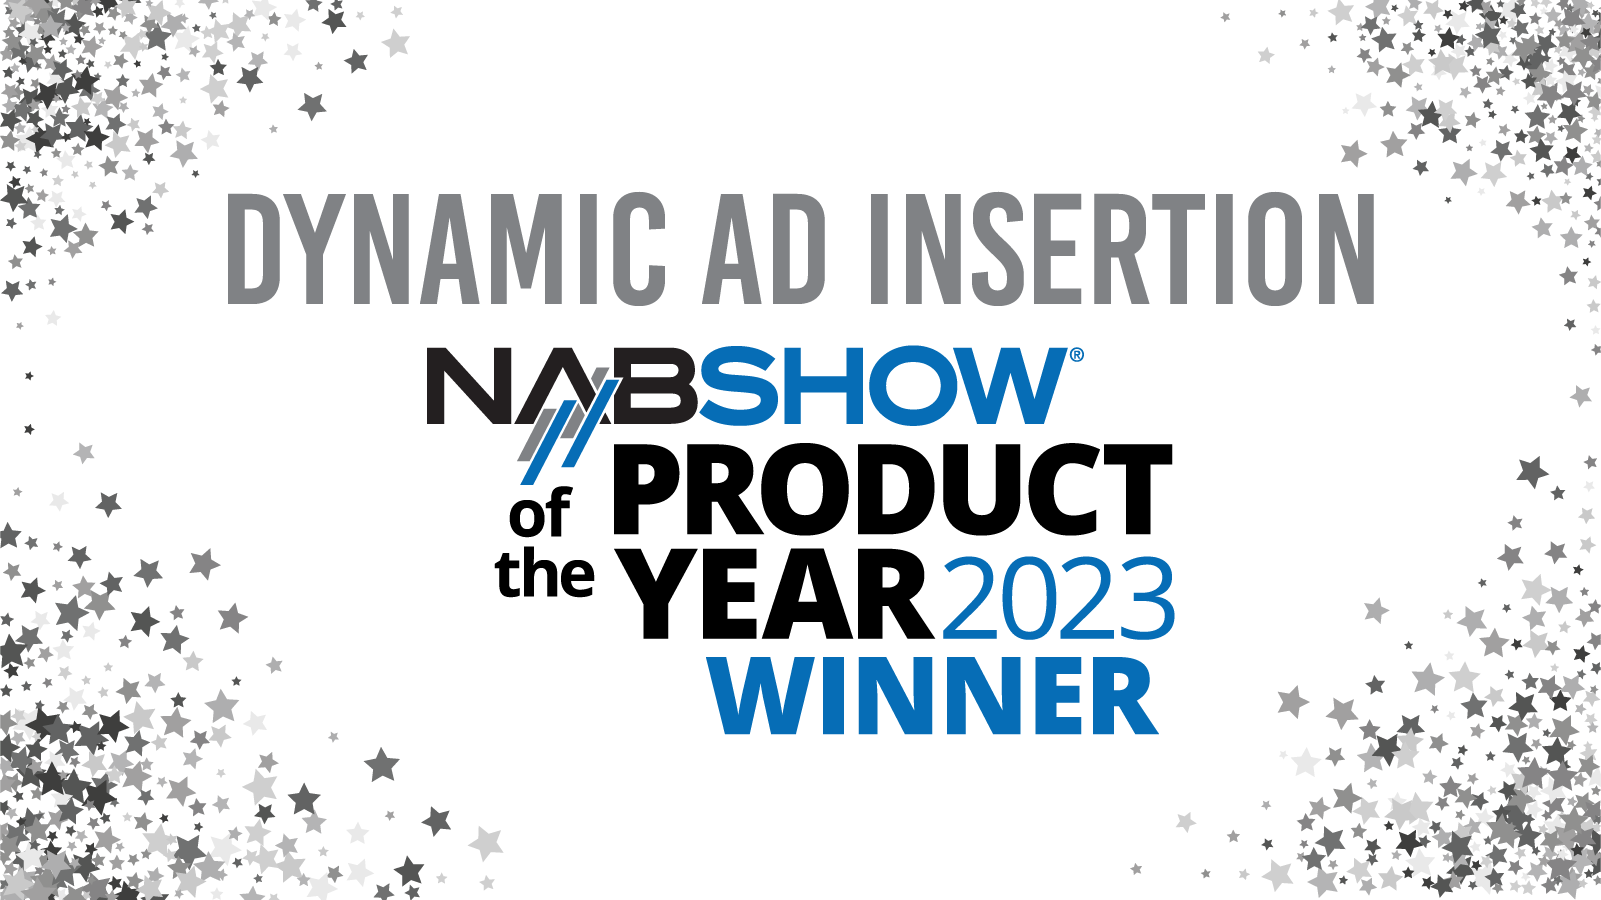 Fincons Group Wins 2023 NAB Show Product of the Year Award  Together with Mediaset and Publitalia ‘80